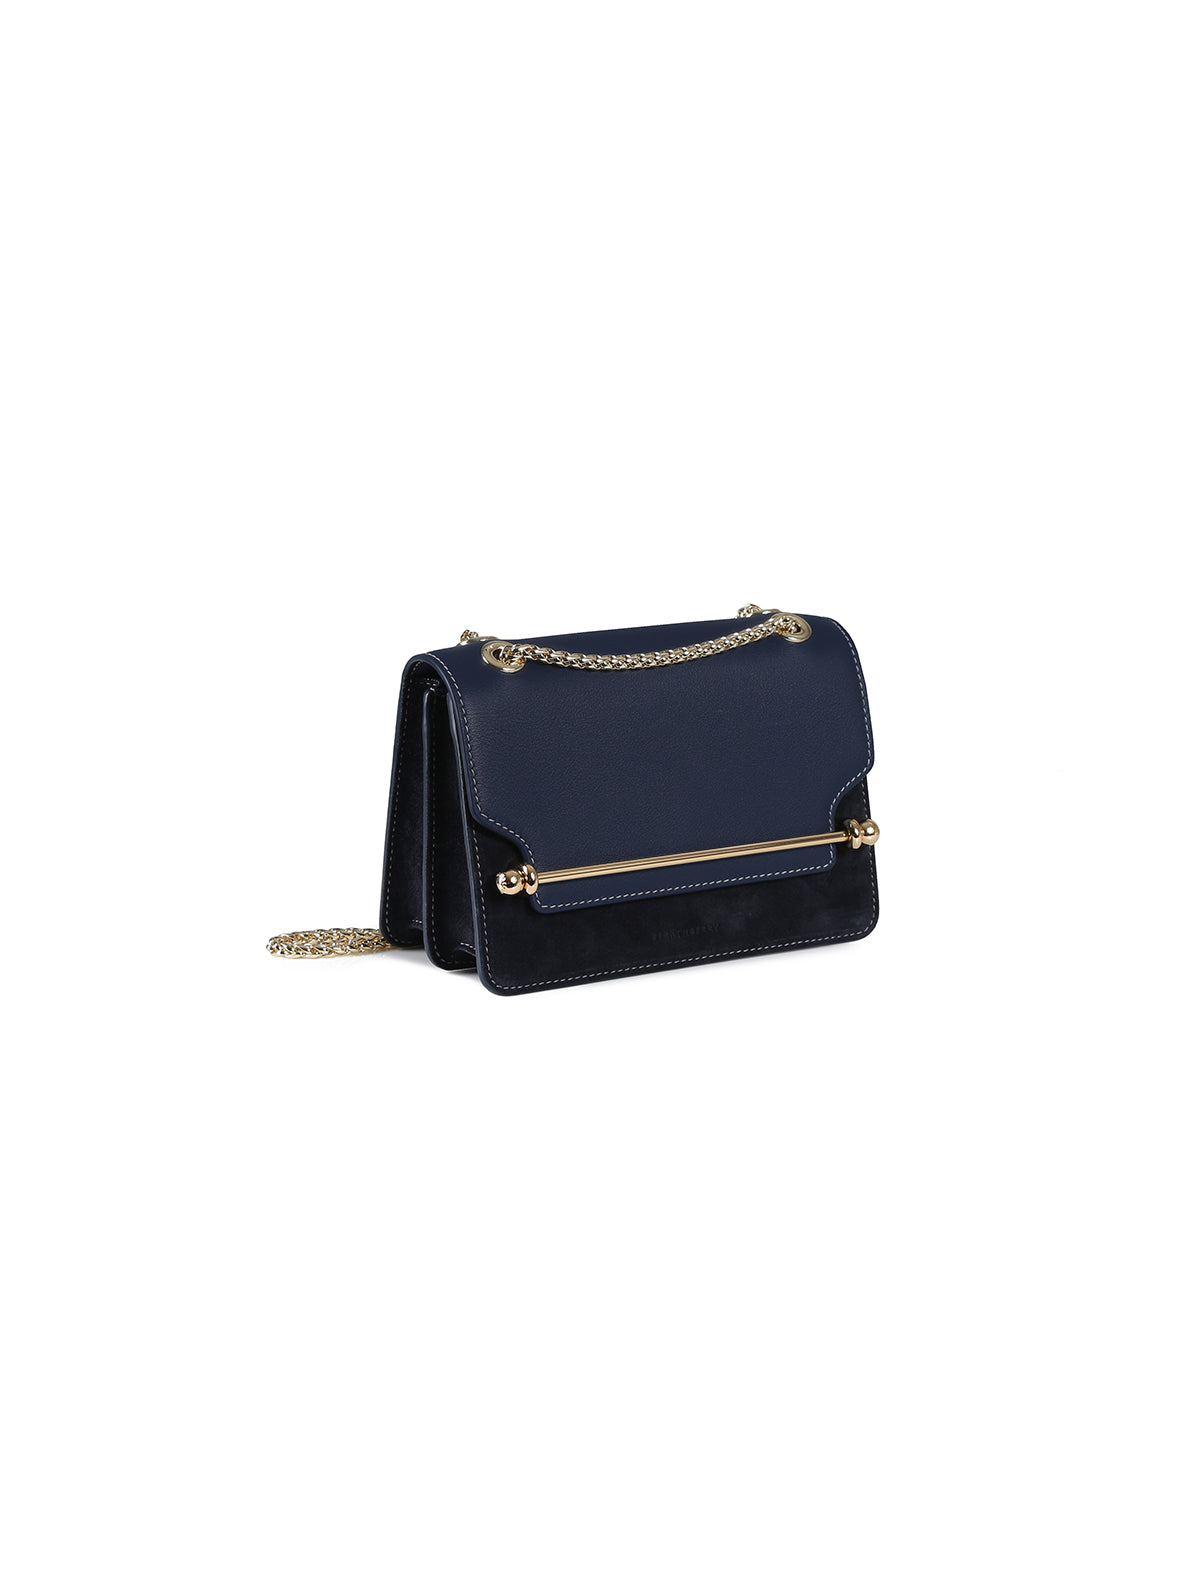 STRATHBERRY East/West Mini Bag in Leather Suede Navy with Grey Stitch